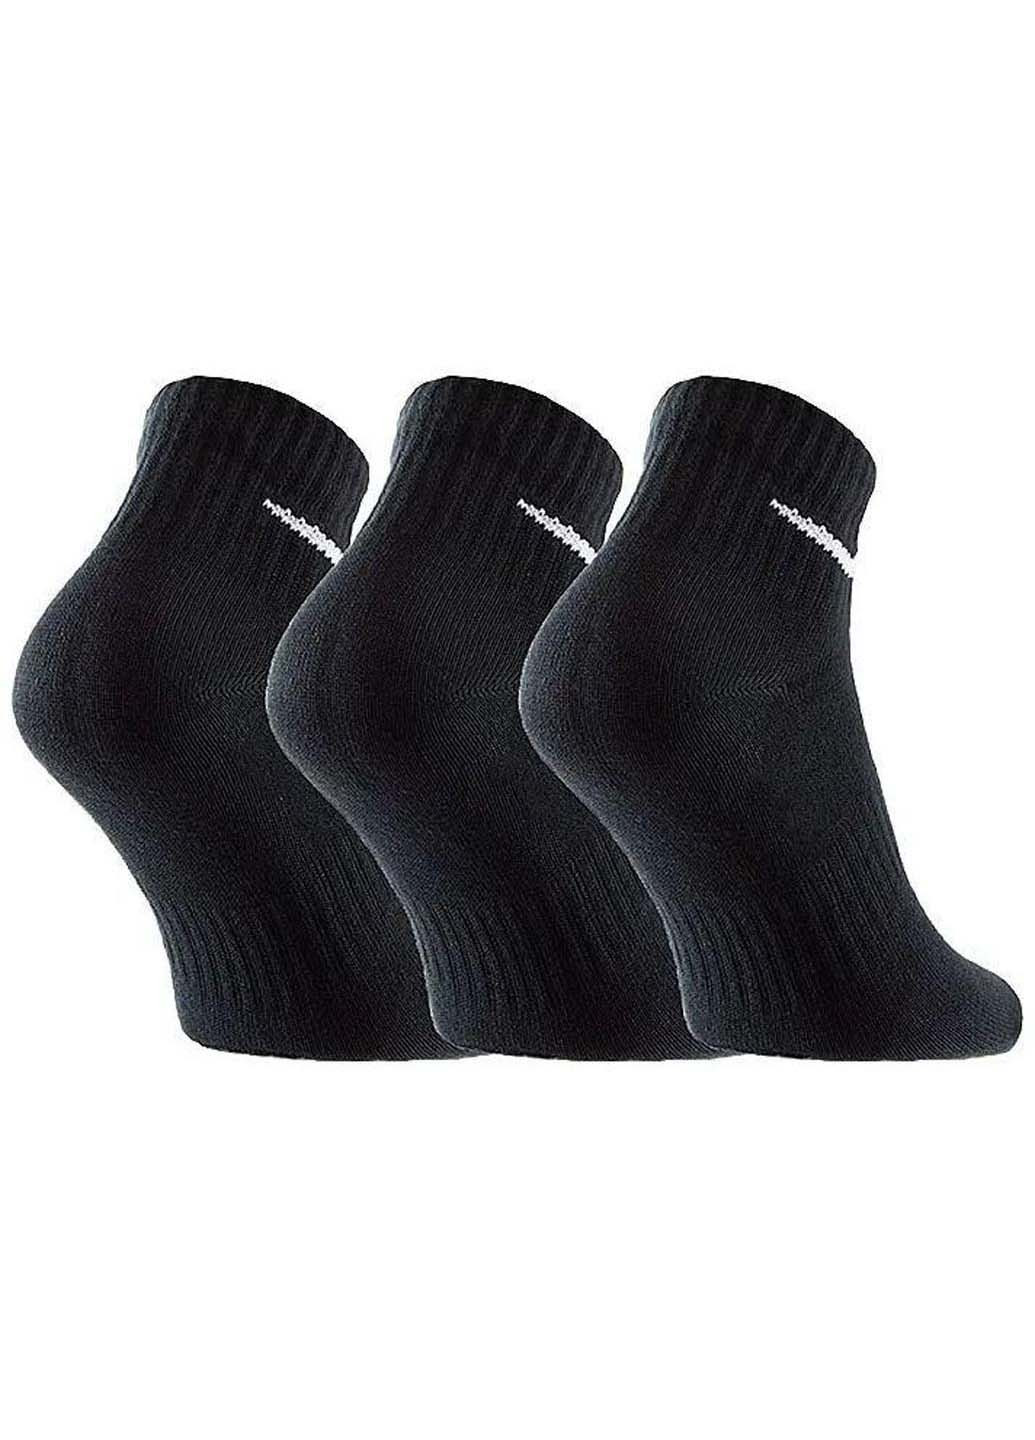 Носки Nike everyday lightweight ankle 3-pack (254883897)